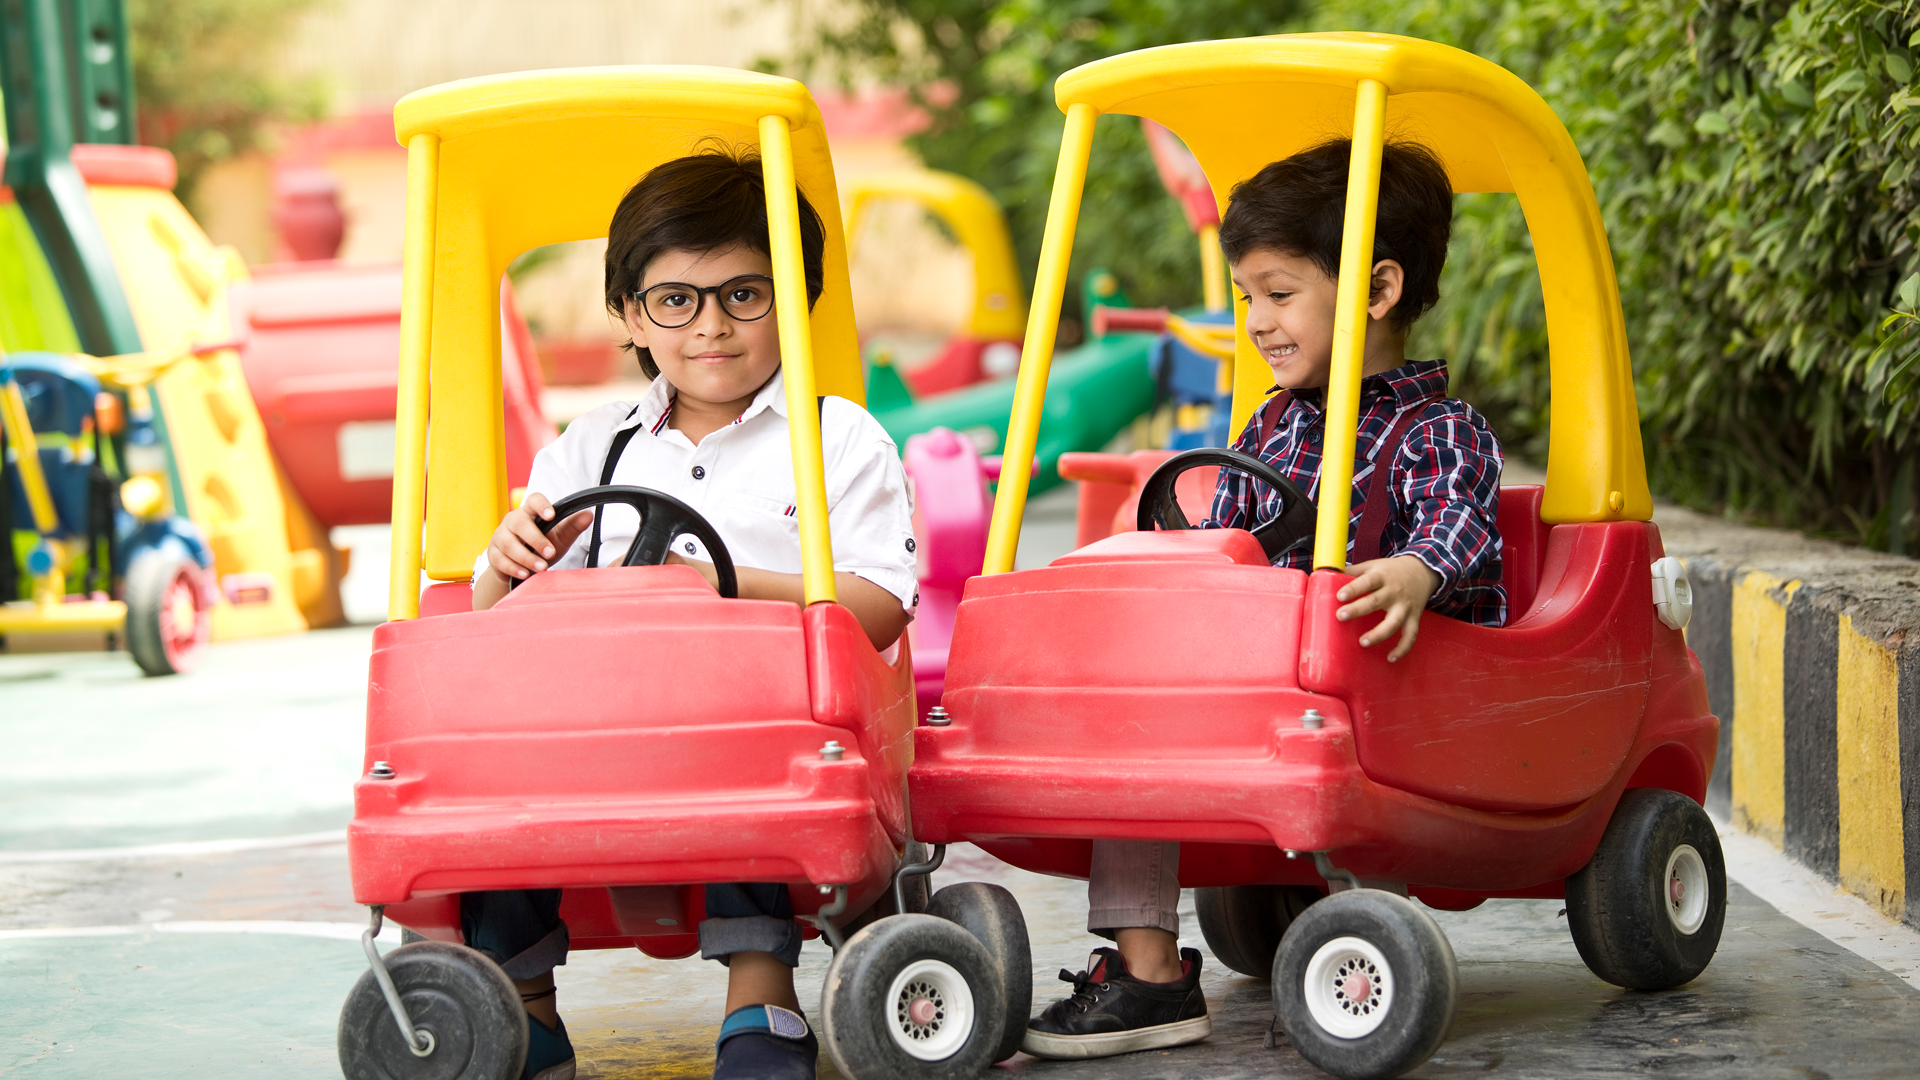 Children playing with cars outside, developing gross motor skills